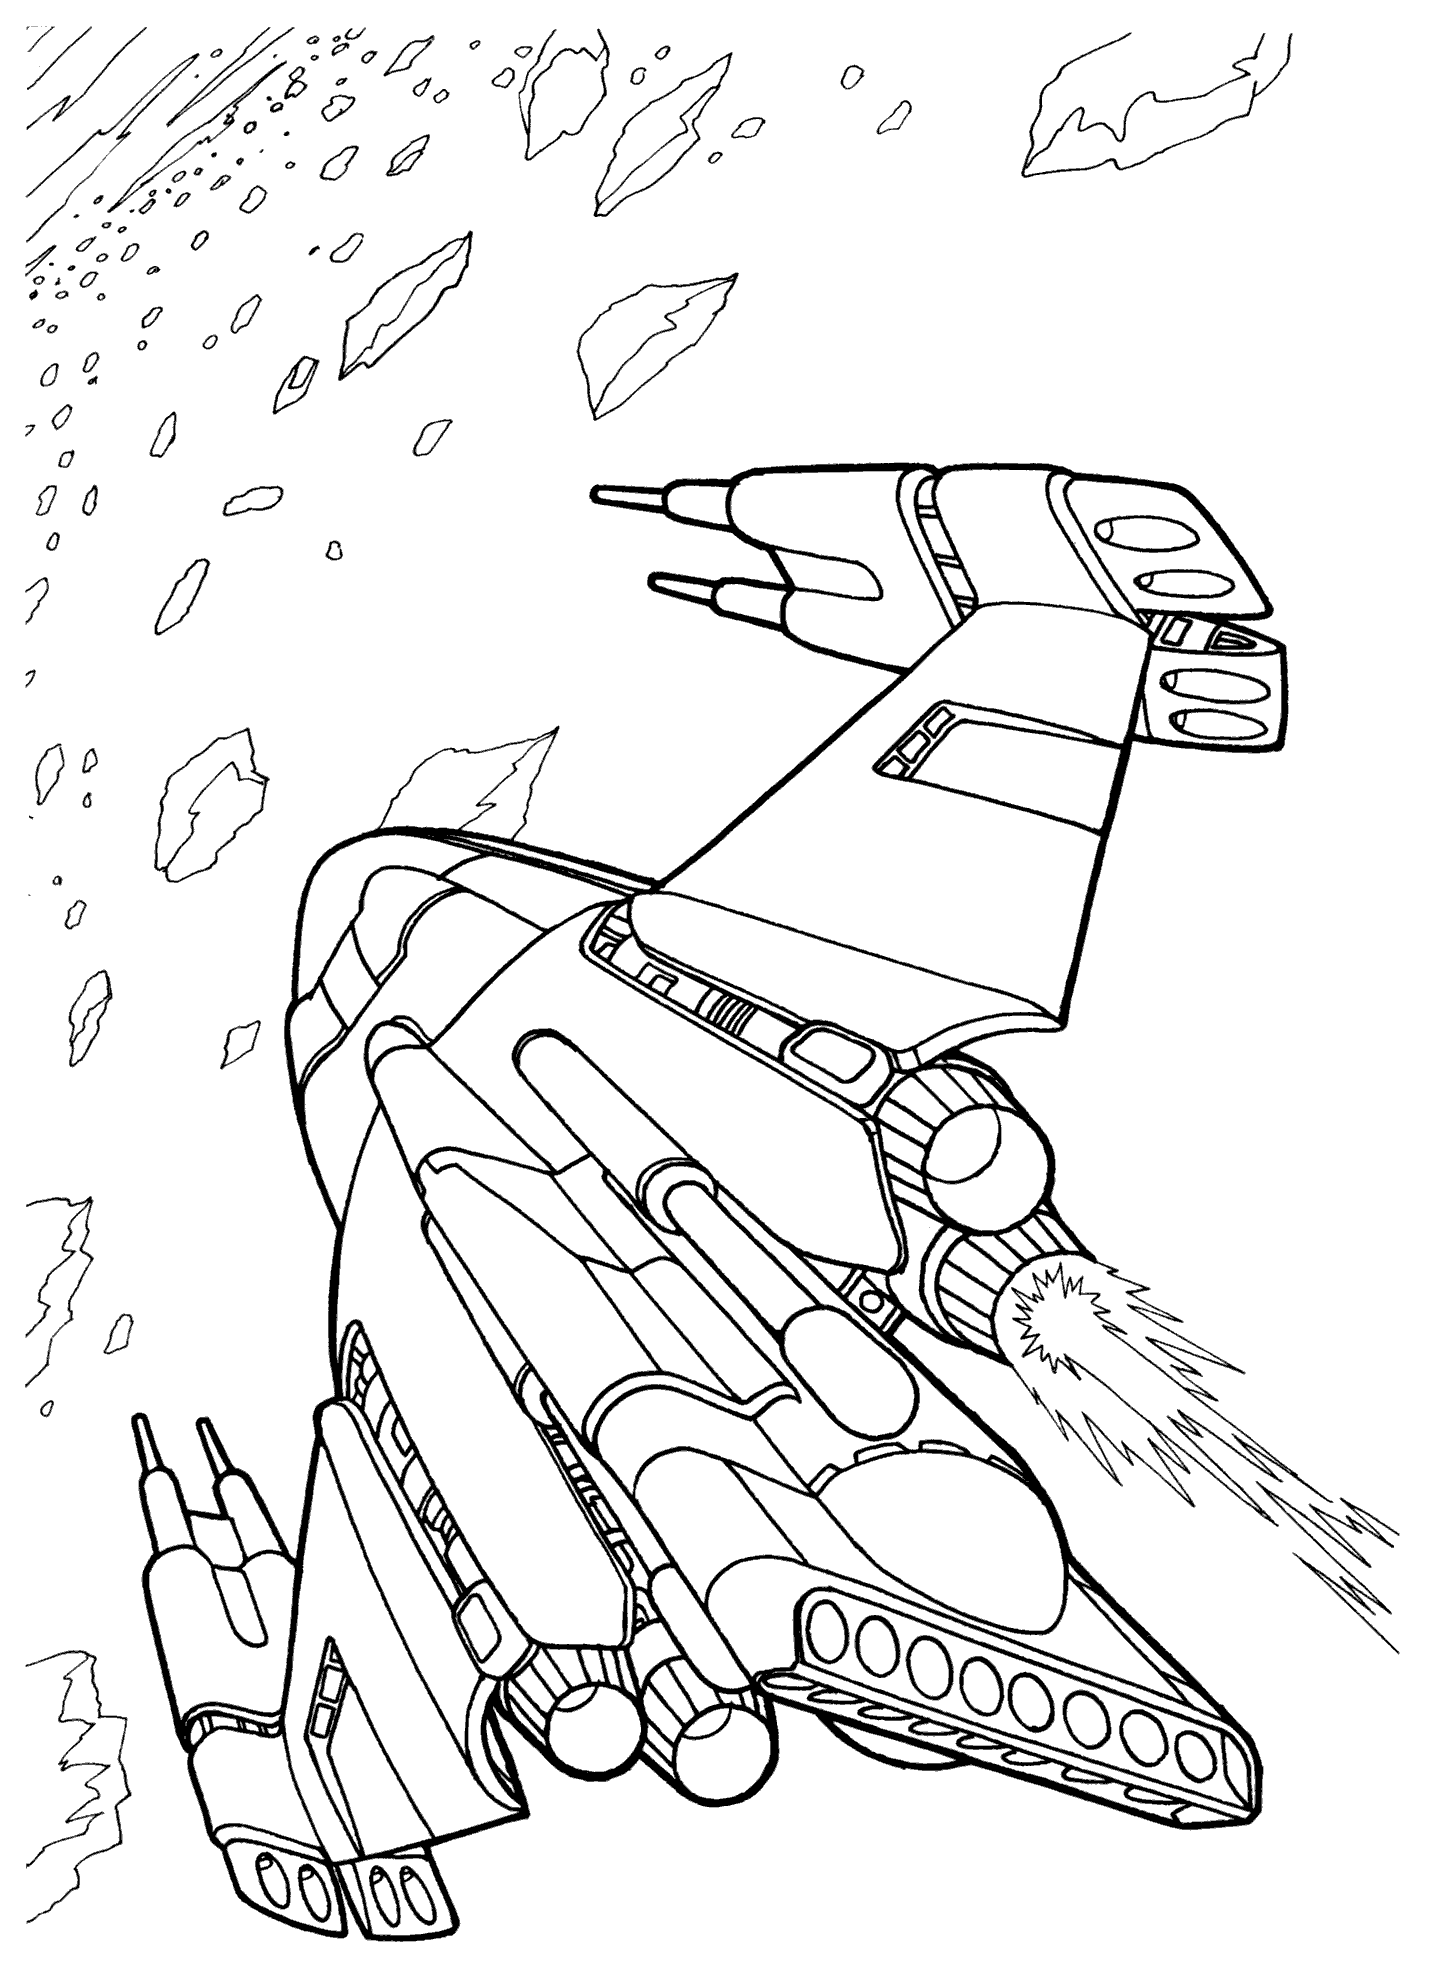 Coloring page - Battle ship in space